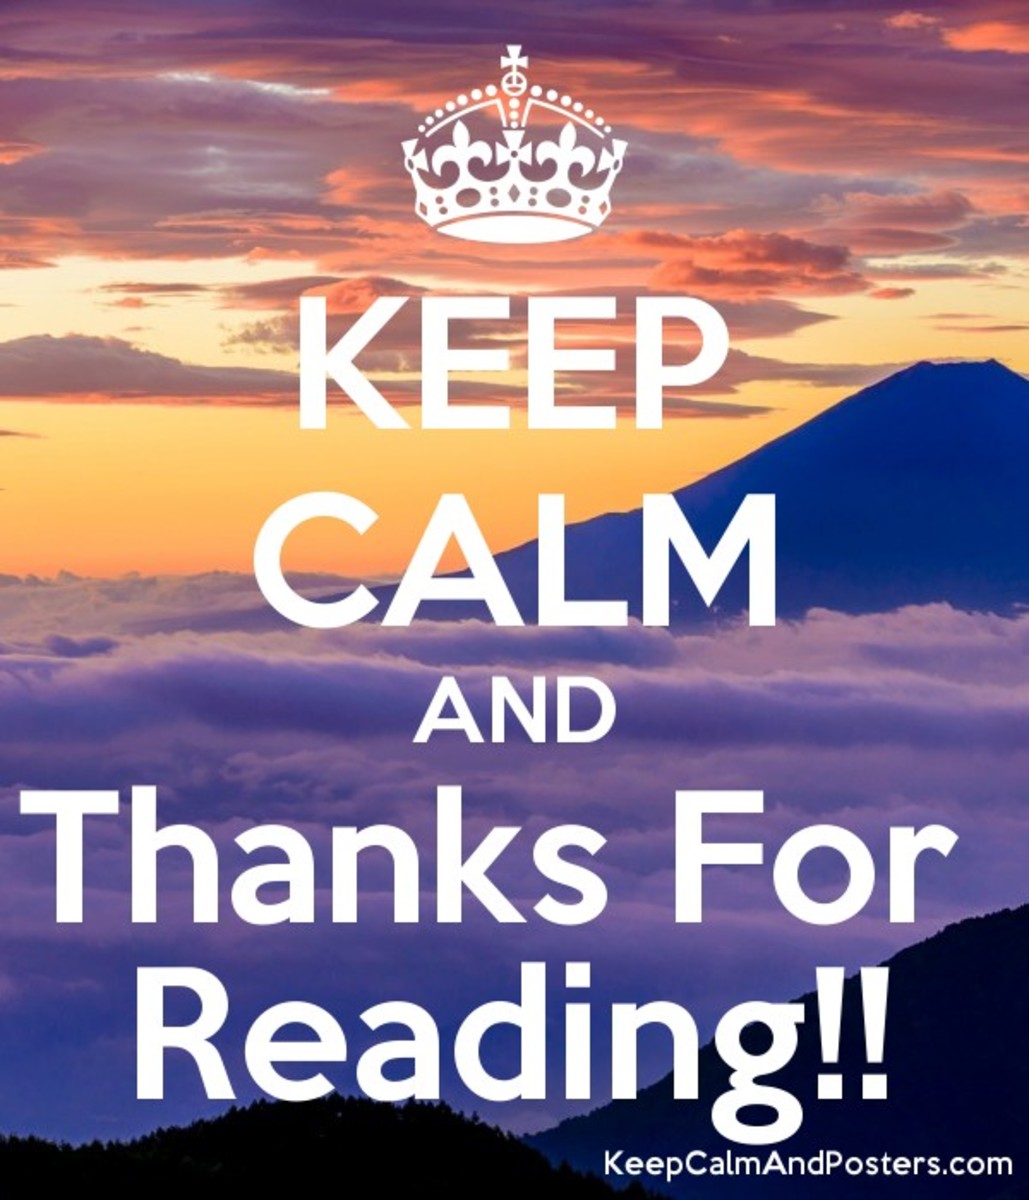 Keep calm and thanks for reading 